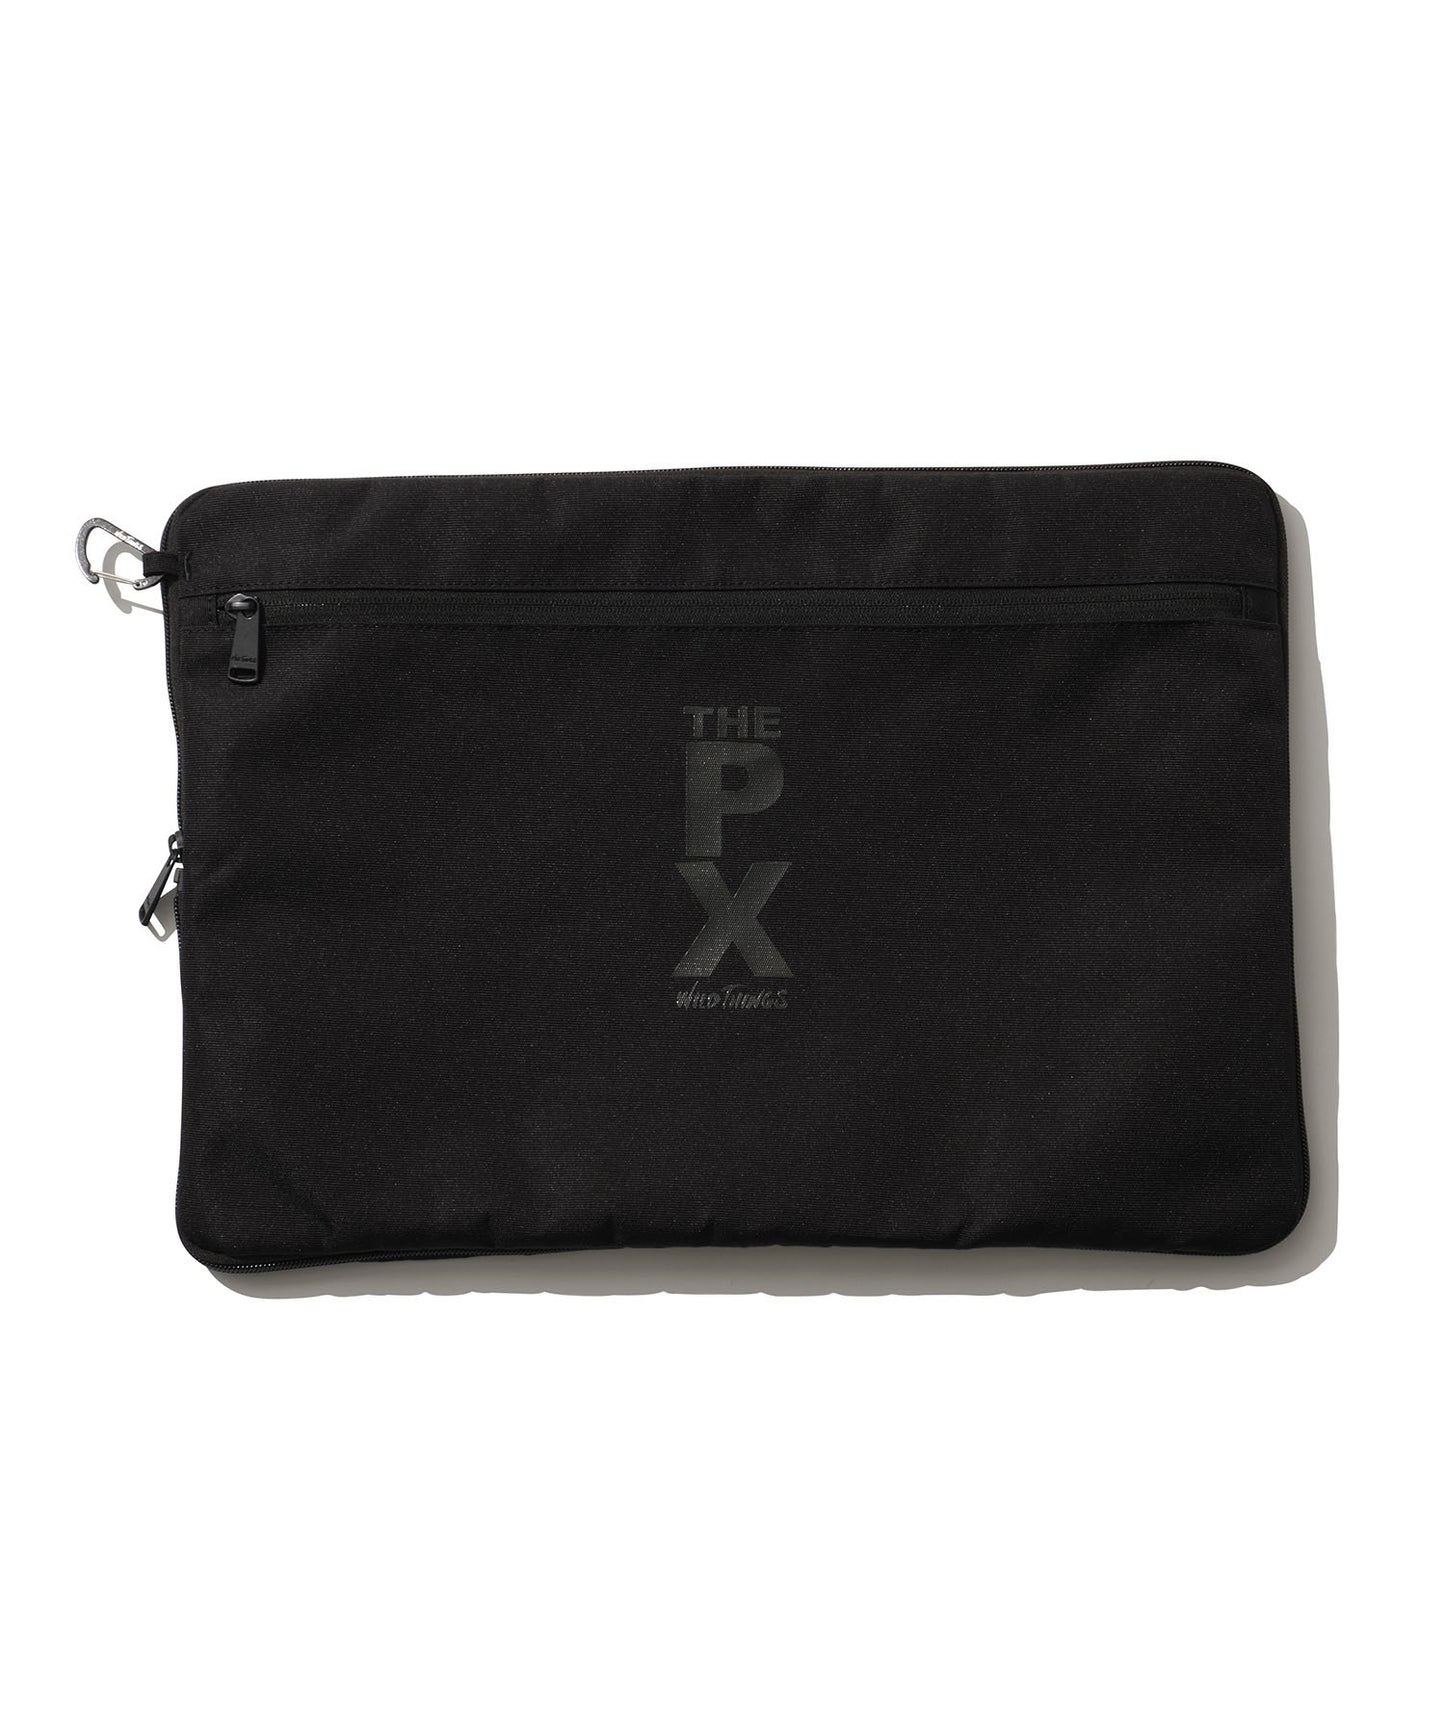 [WILD THINGS ワイルドシングス] THE PX MULTI POUCH A3｜マルチポーチ(A3)＜BLACK＞